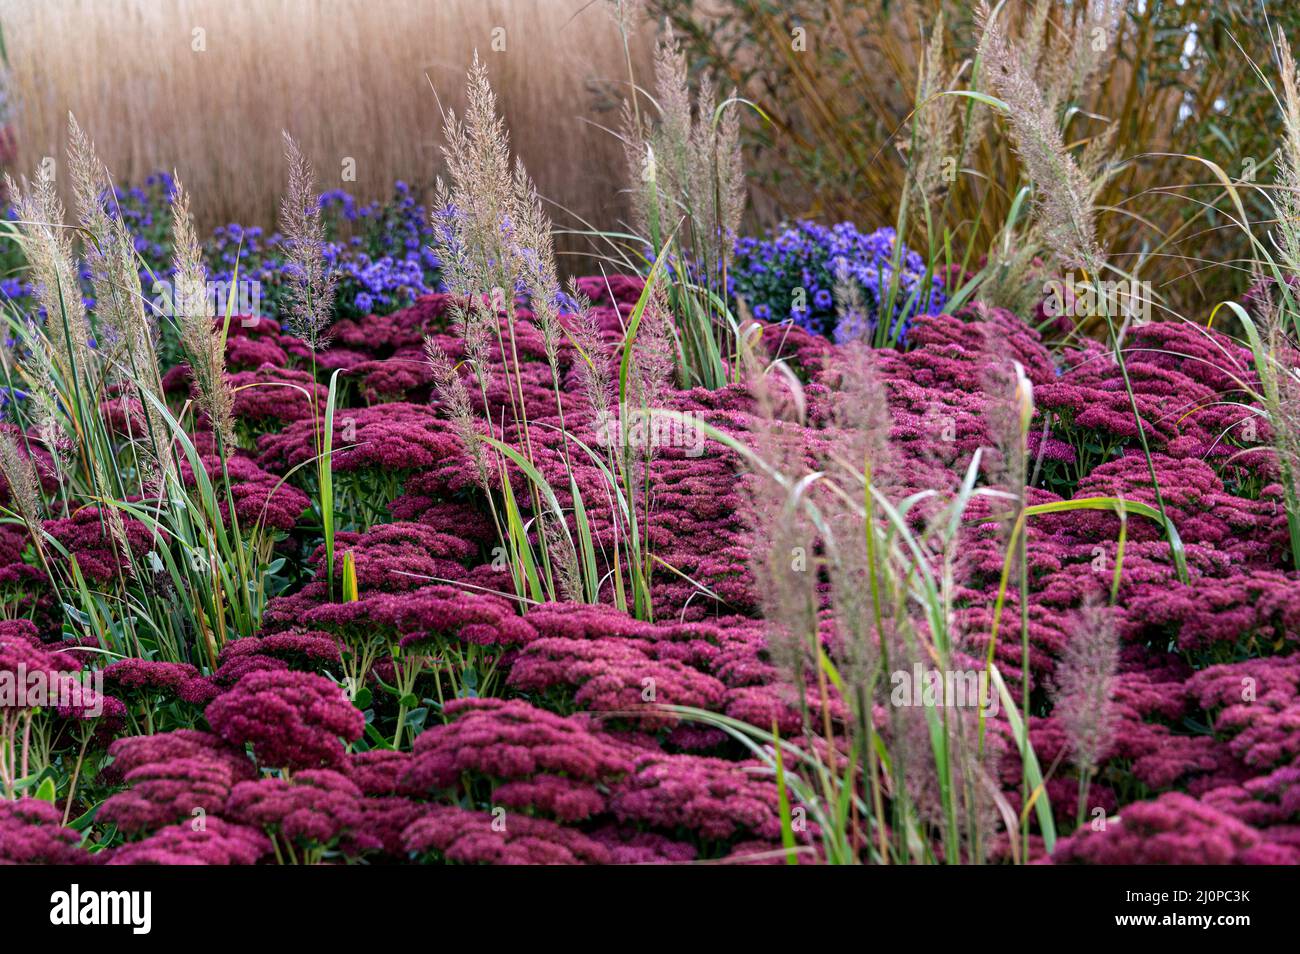 Calamagrostis brachytricha, hylotelephium Herbstfreude, Crassulaceae, Poaceae. Colourful autumn planting, with grasses adding structure. Stock Photo